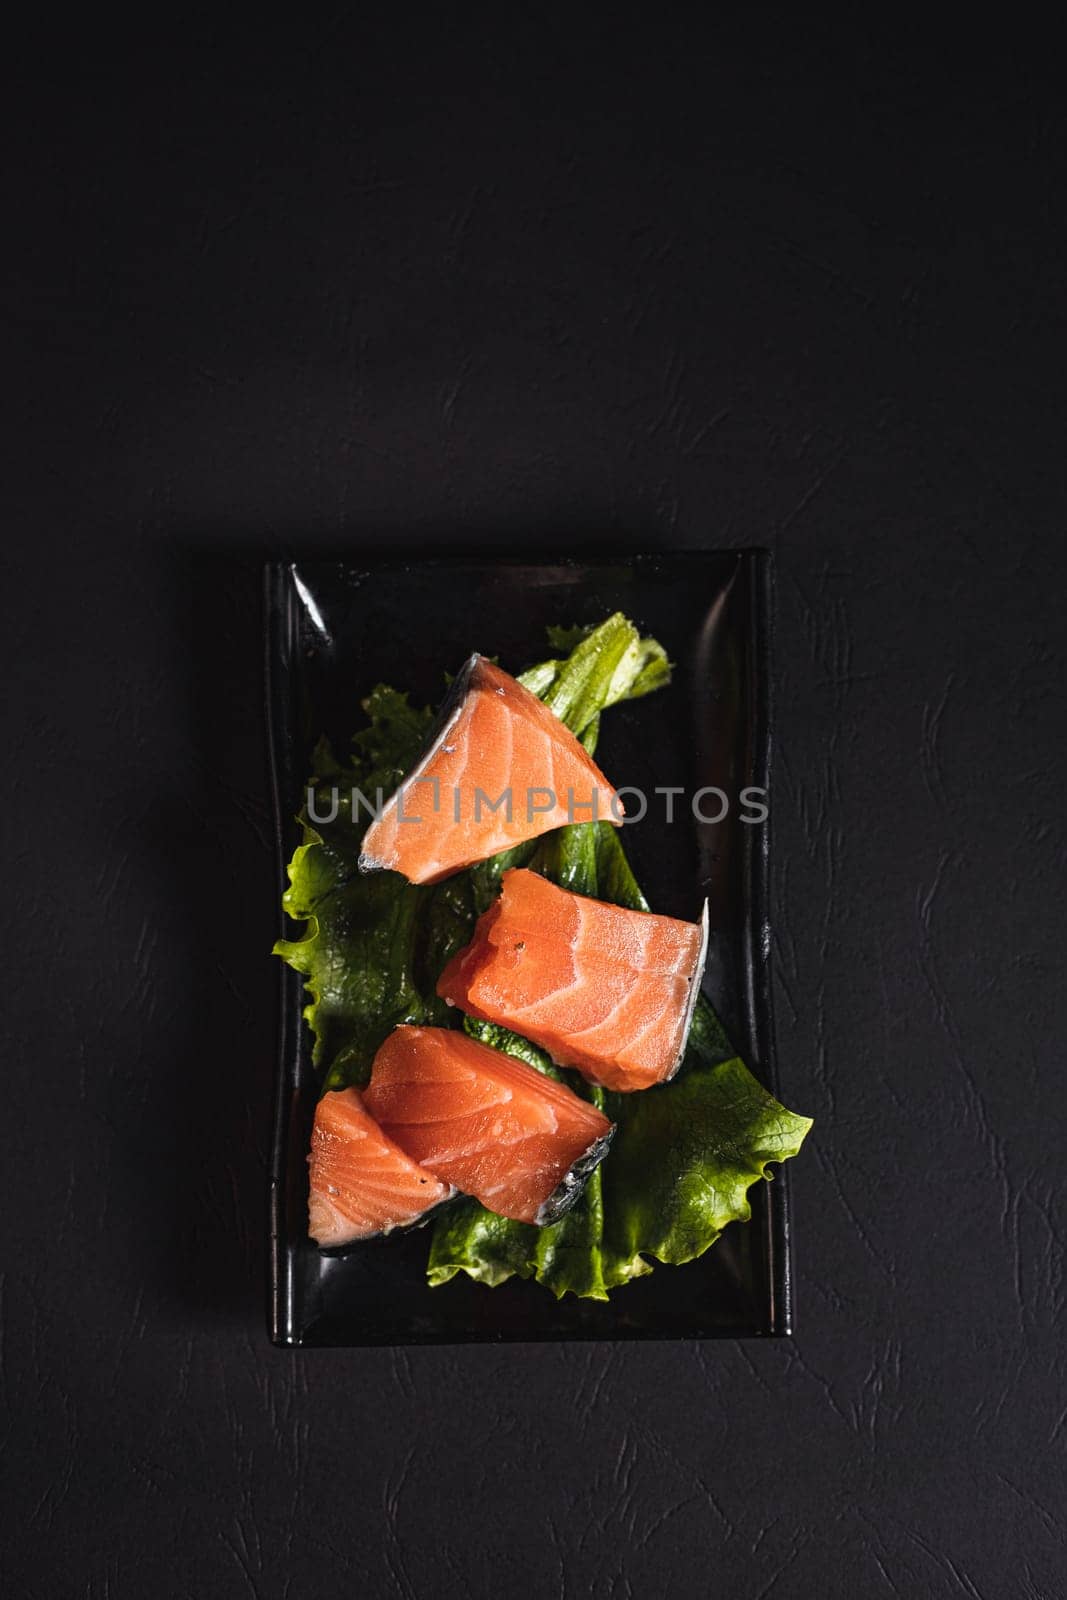 red fish on lettuce leaves on a black plate